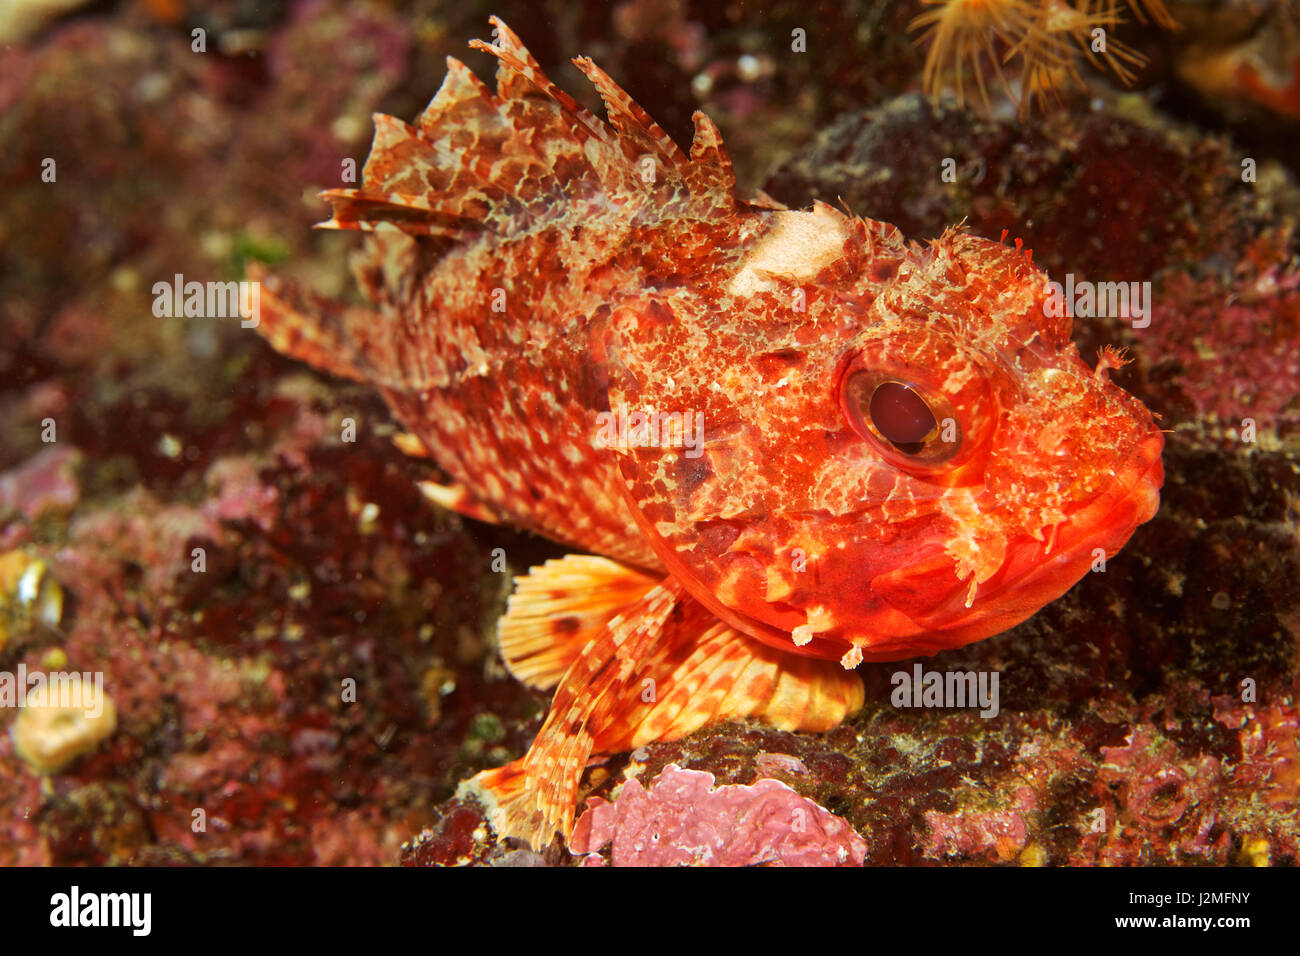 Small red scorpionfish from Pag, Adriatic Sea Stock Photo